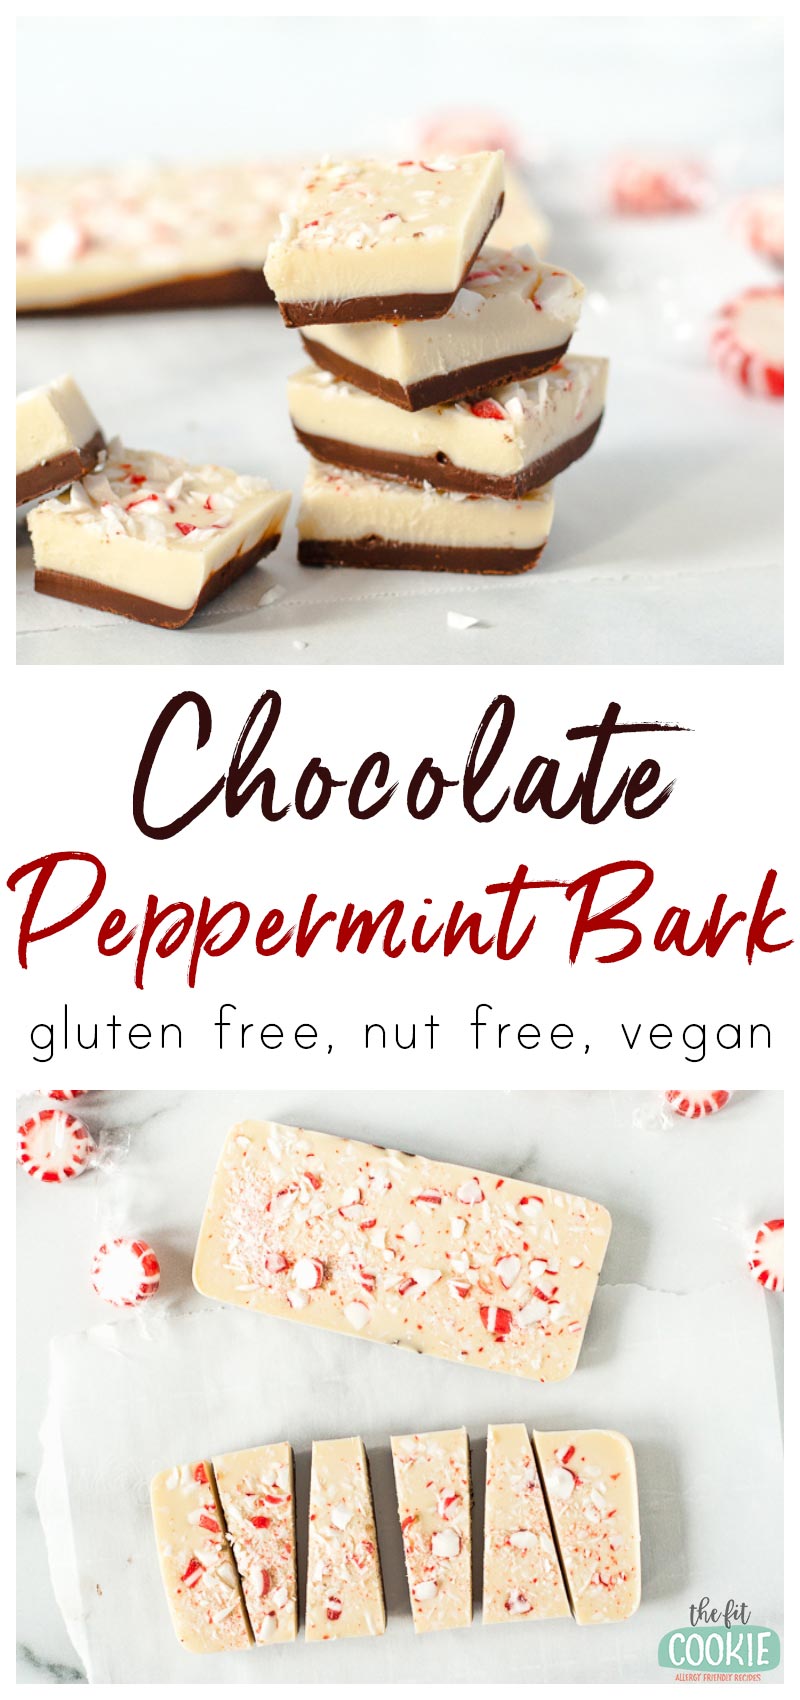 photo collage of layered vegan peppermint bark